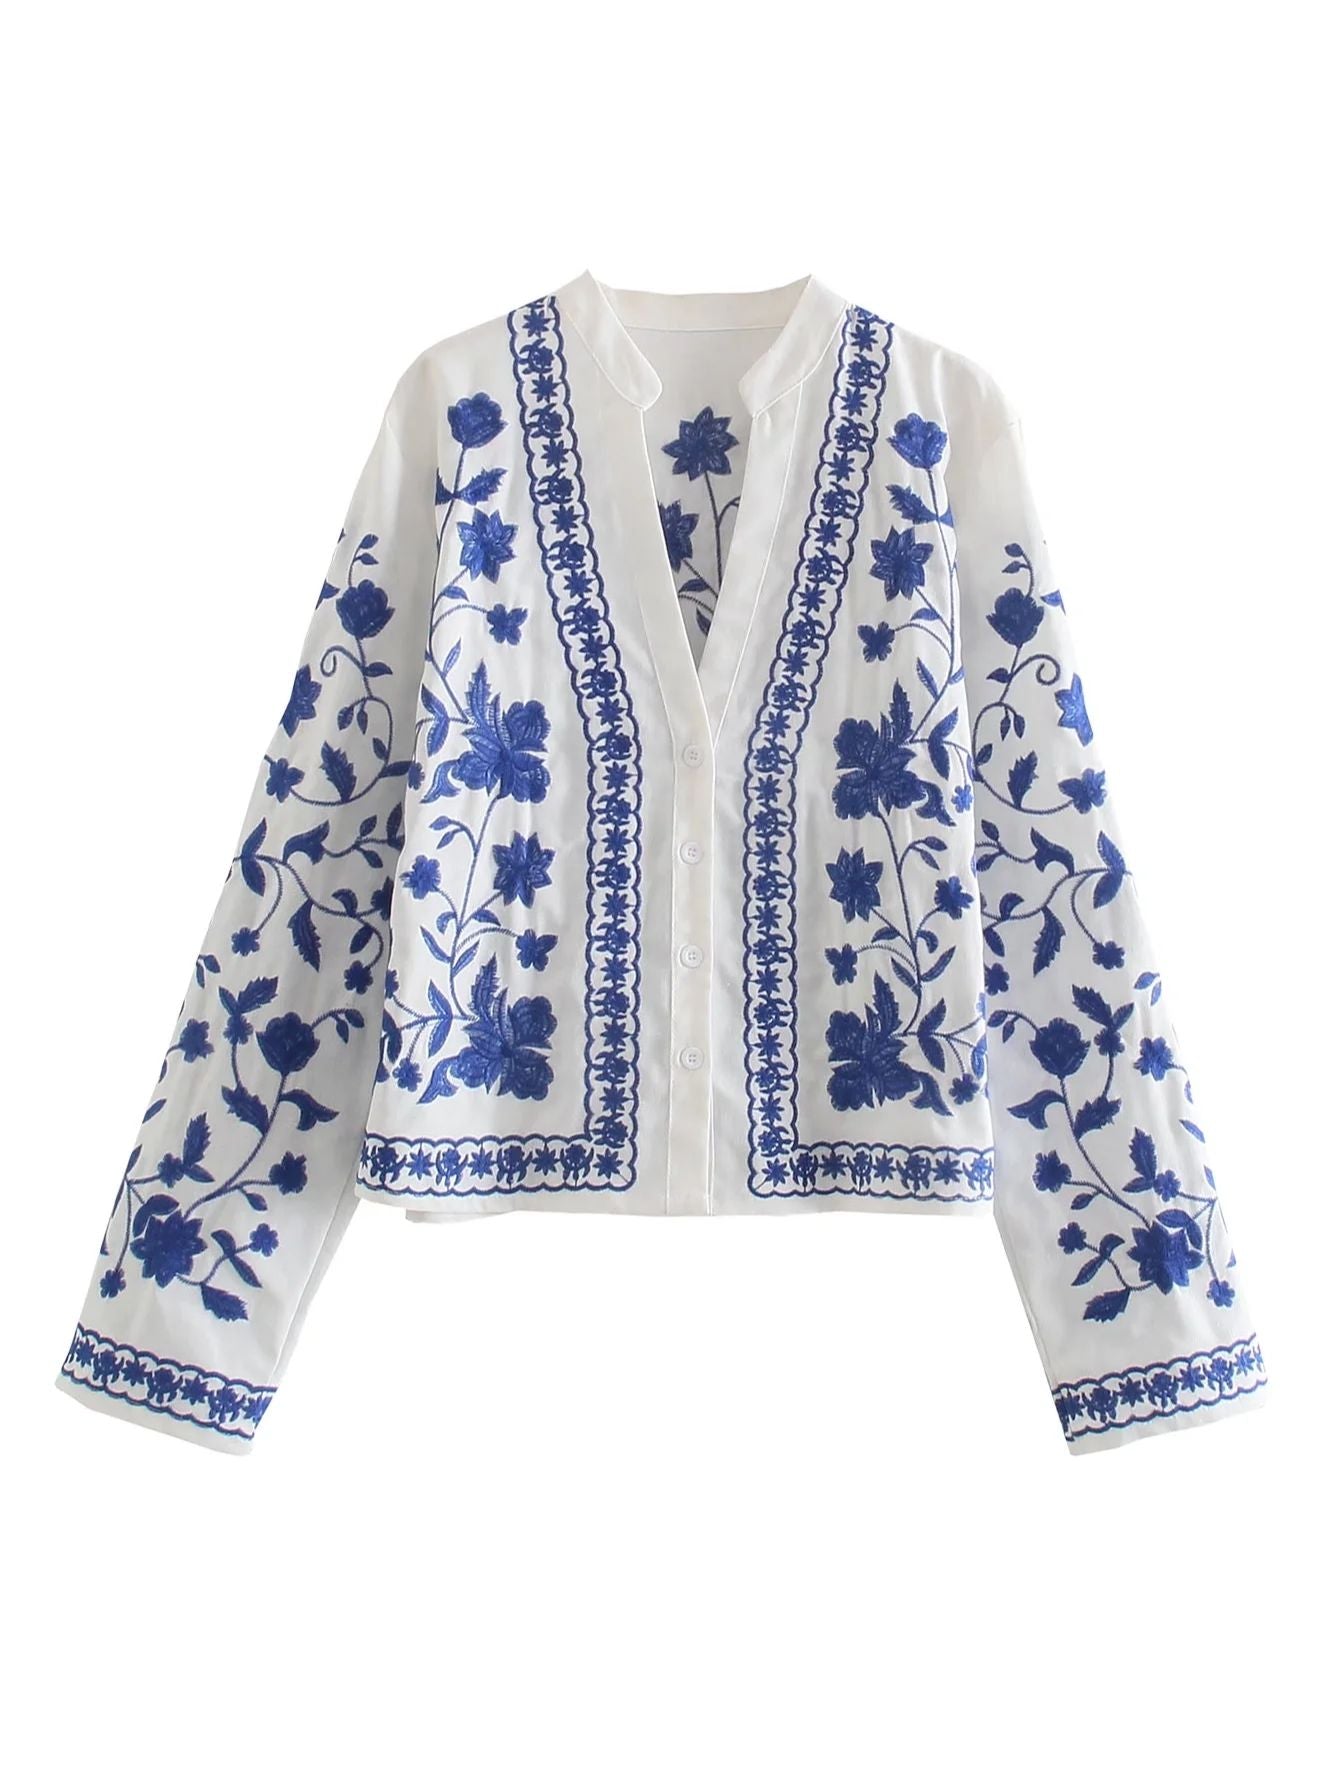 Embroidered Cardigan